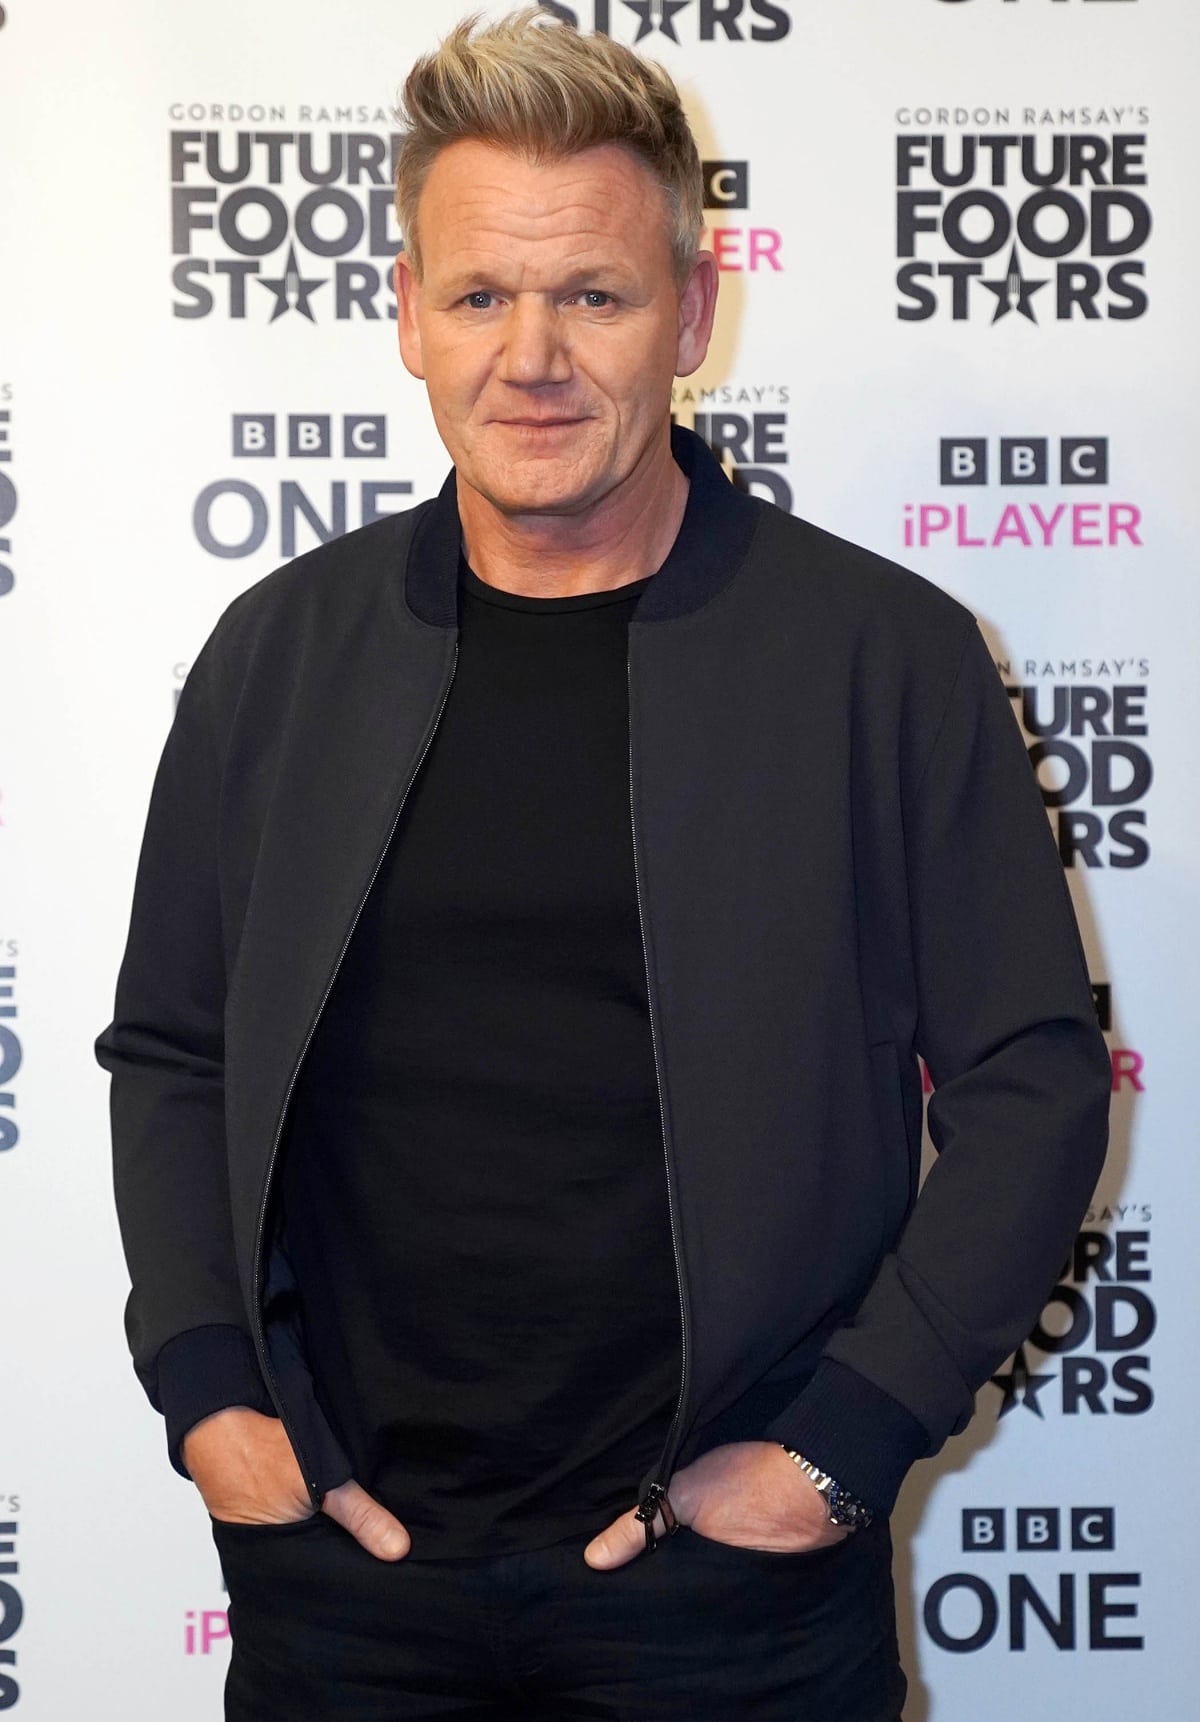 Gordon Ramsay at the launch of Gordon Ramsay’s Future Food Stars, a new food entertainment series for BBC One